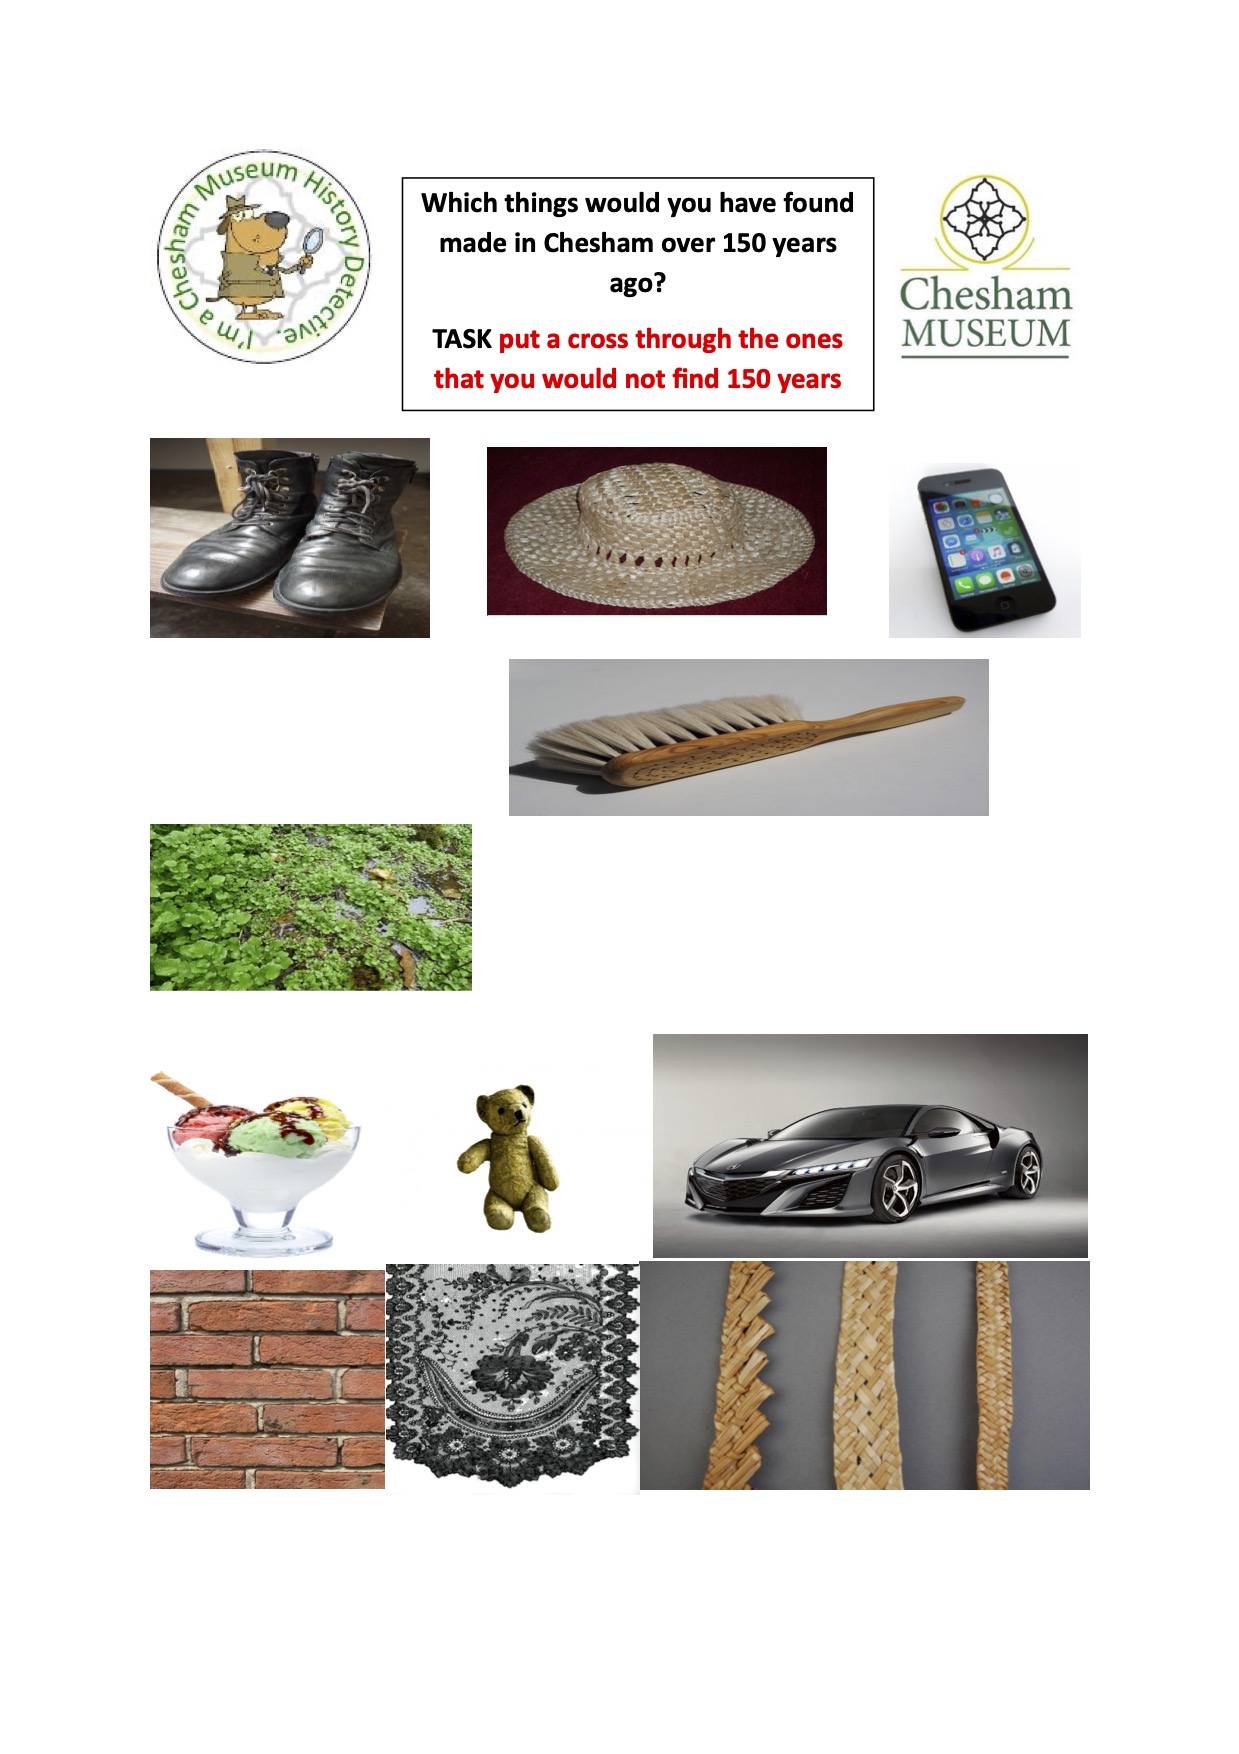 School worksheet showing images of items that might have been made in Chesham 150 years ago